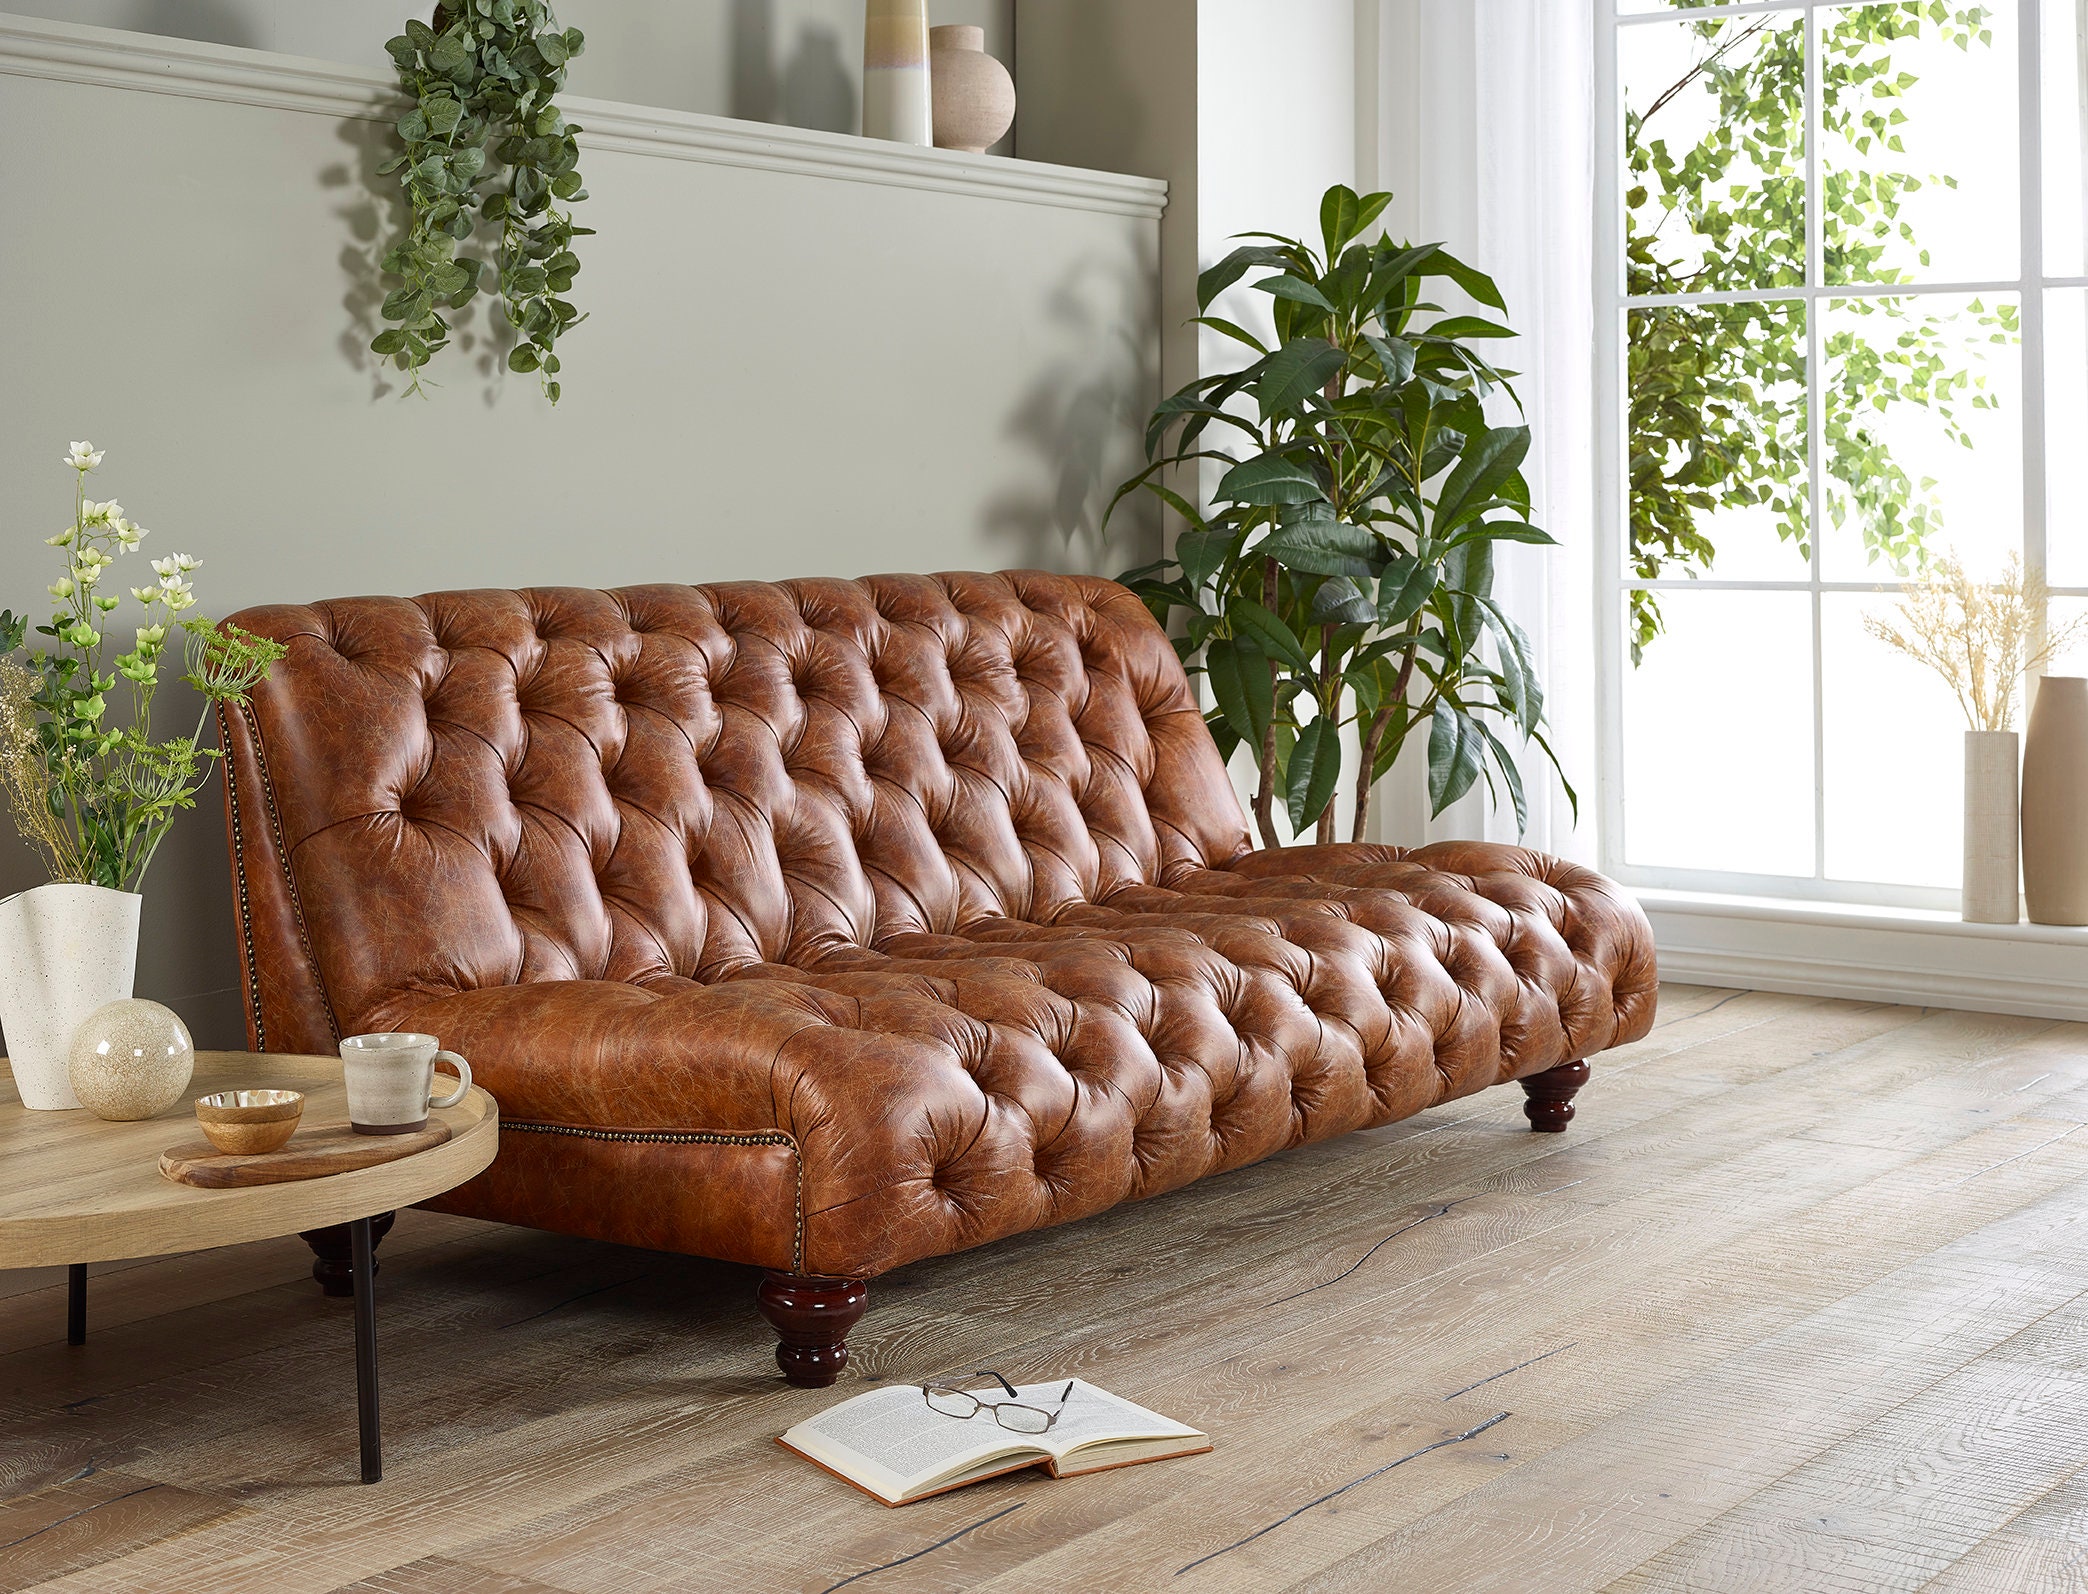 BRITISH HANDMADE REAL Leather Patchwork Sofa King Albert Colour Combination  Varndell Design Patches Leather Contemporary Chesterfield 